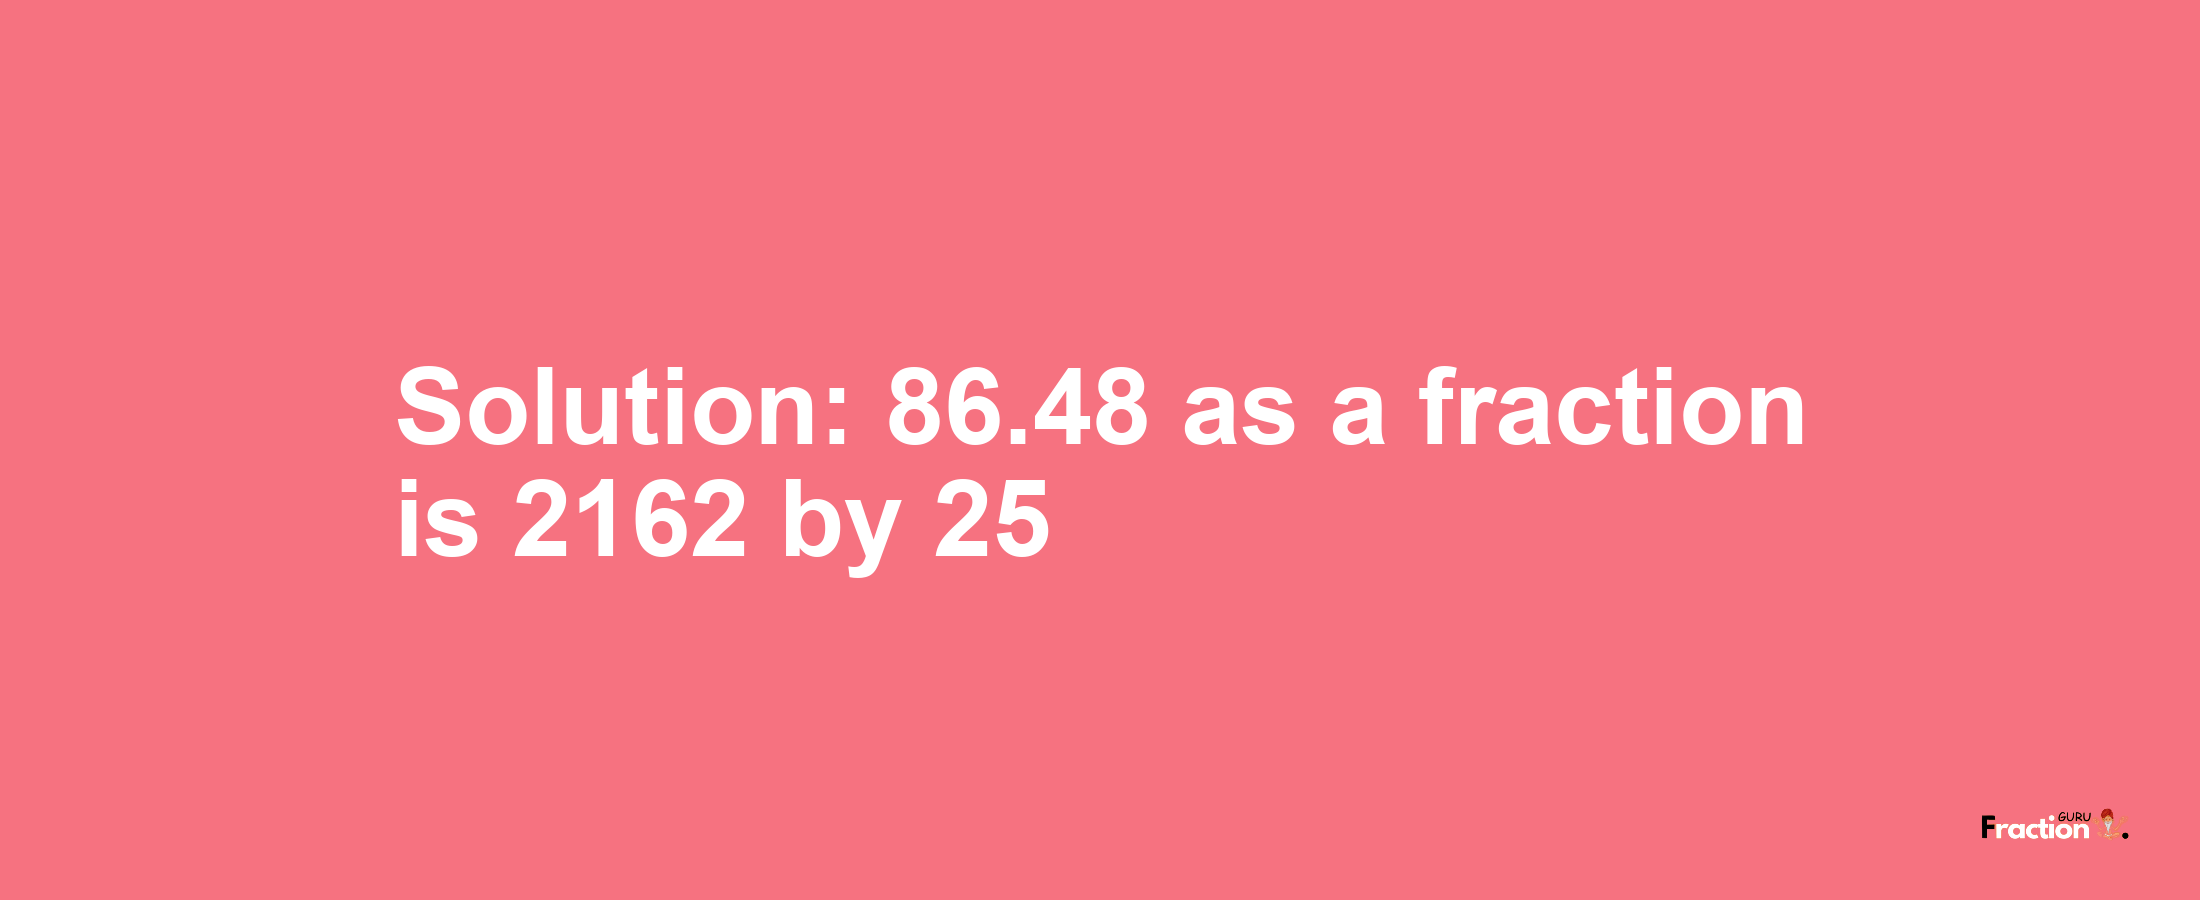 Solution:86.48 as a fraction is 2162/25